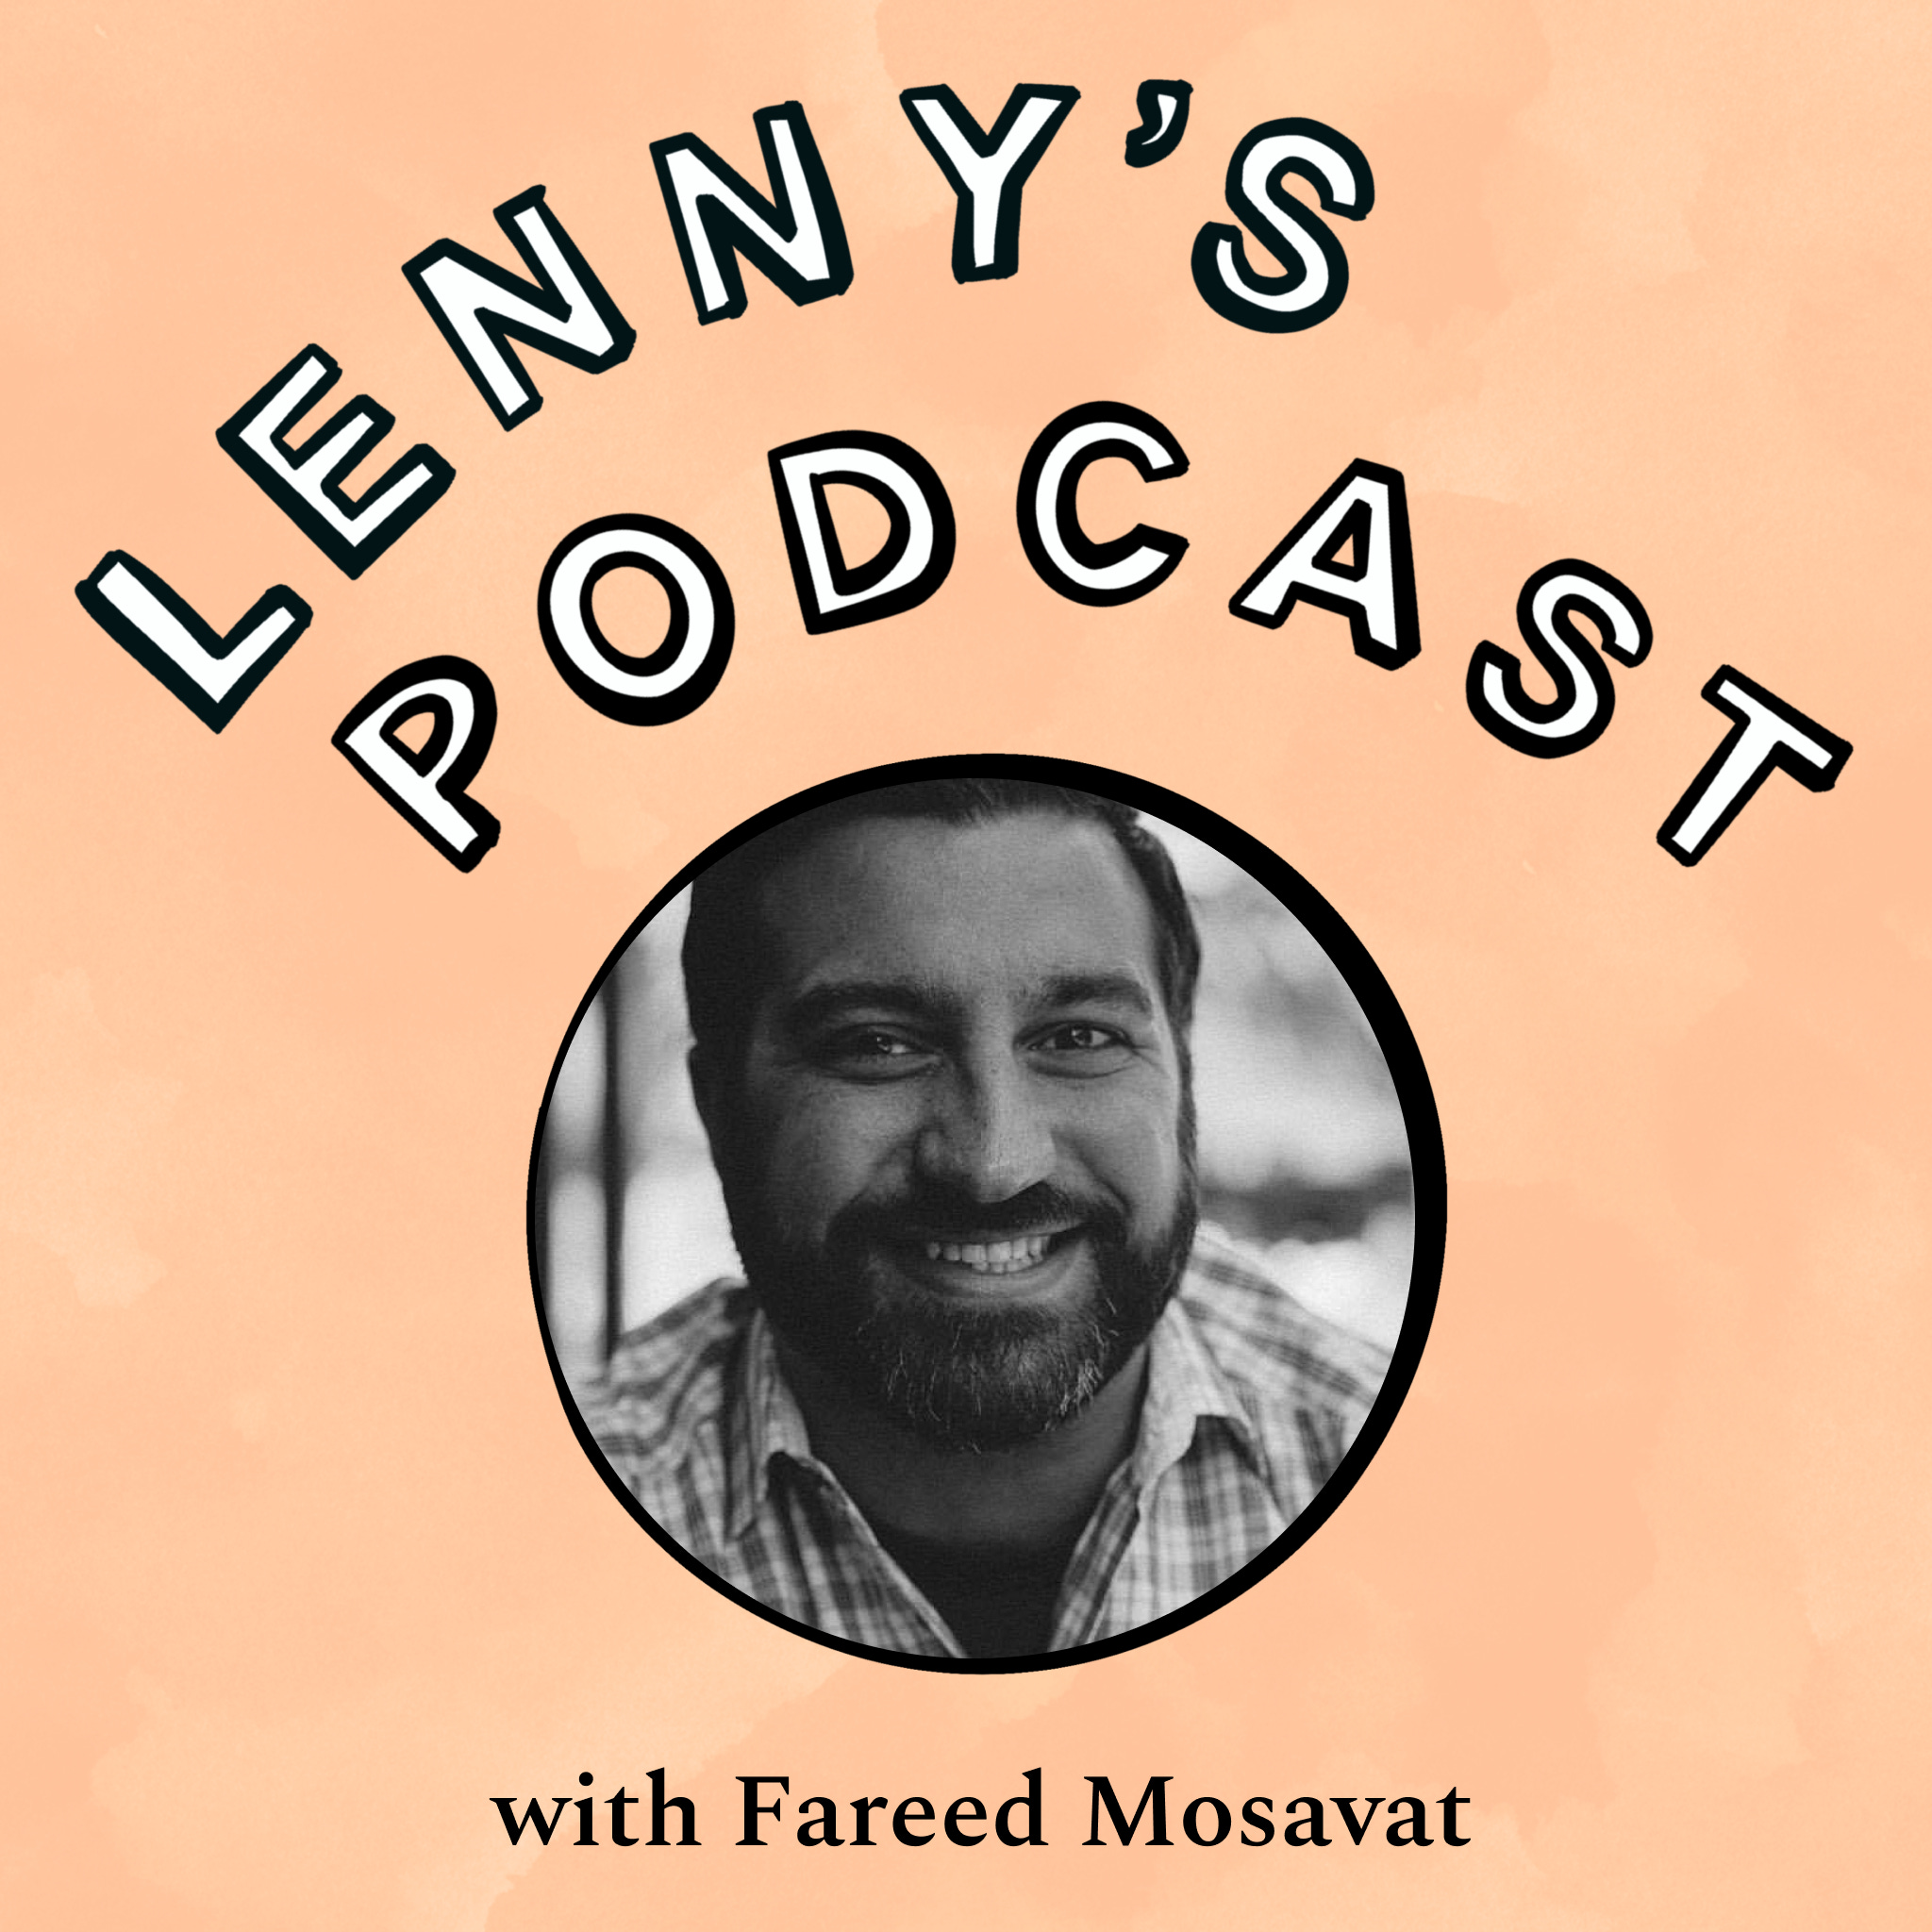 How to build trust and grow as a product leader | Fareed Mosavat (Reforge, Slack, Instacart, Zynga, Pixar) Image